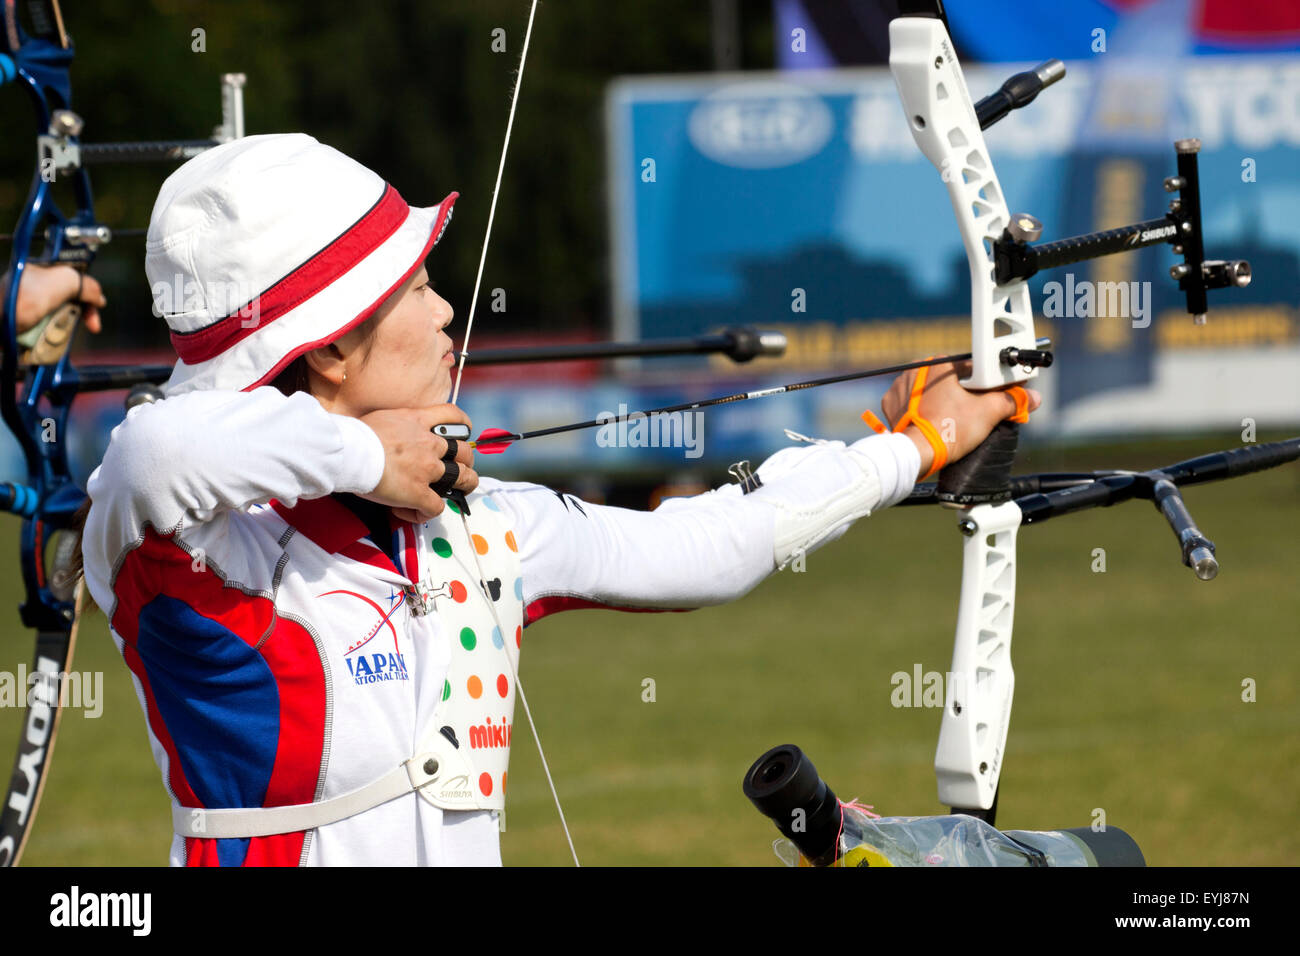 Copenhagen, Denmark, July 30th, 2015: Japanese archer Kaori Kawanaka competes in the World Archery Championships in Copenhagen during Thursday's individual matches  in recurve bow. Credit:  OJPHOTOS/Alamy Live News Stock Photo